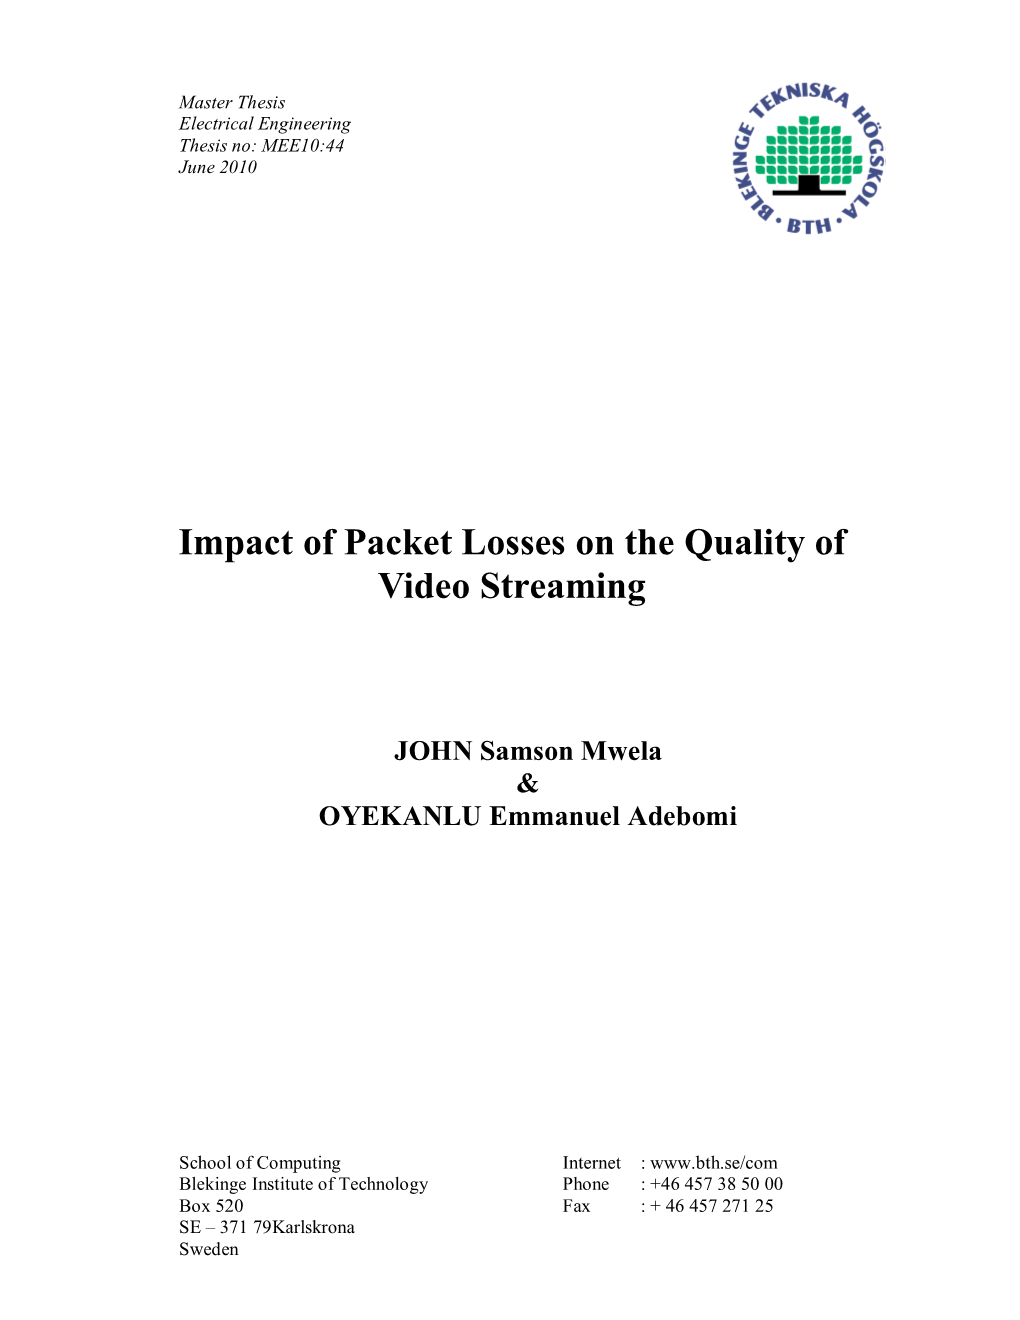 Impact of Packet Losses on the Quality of Video Streaming